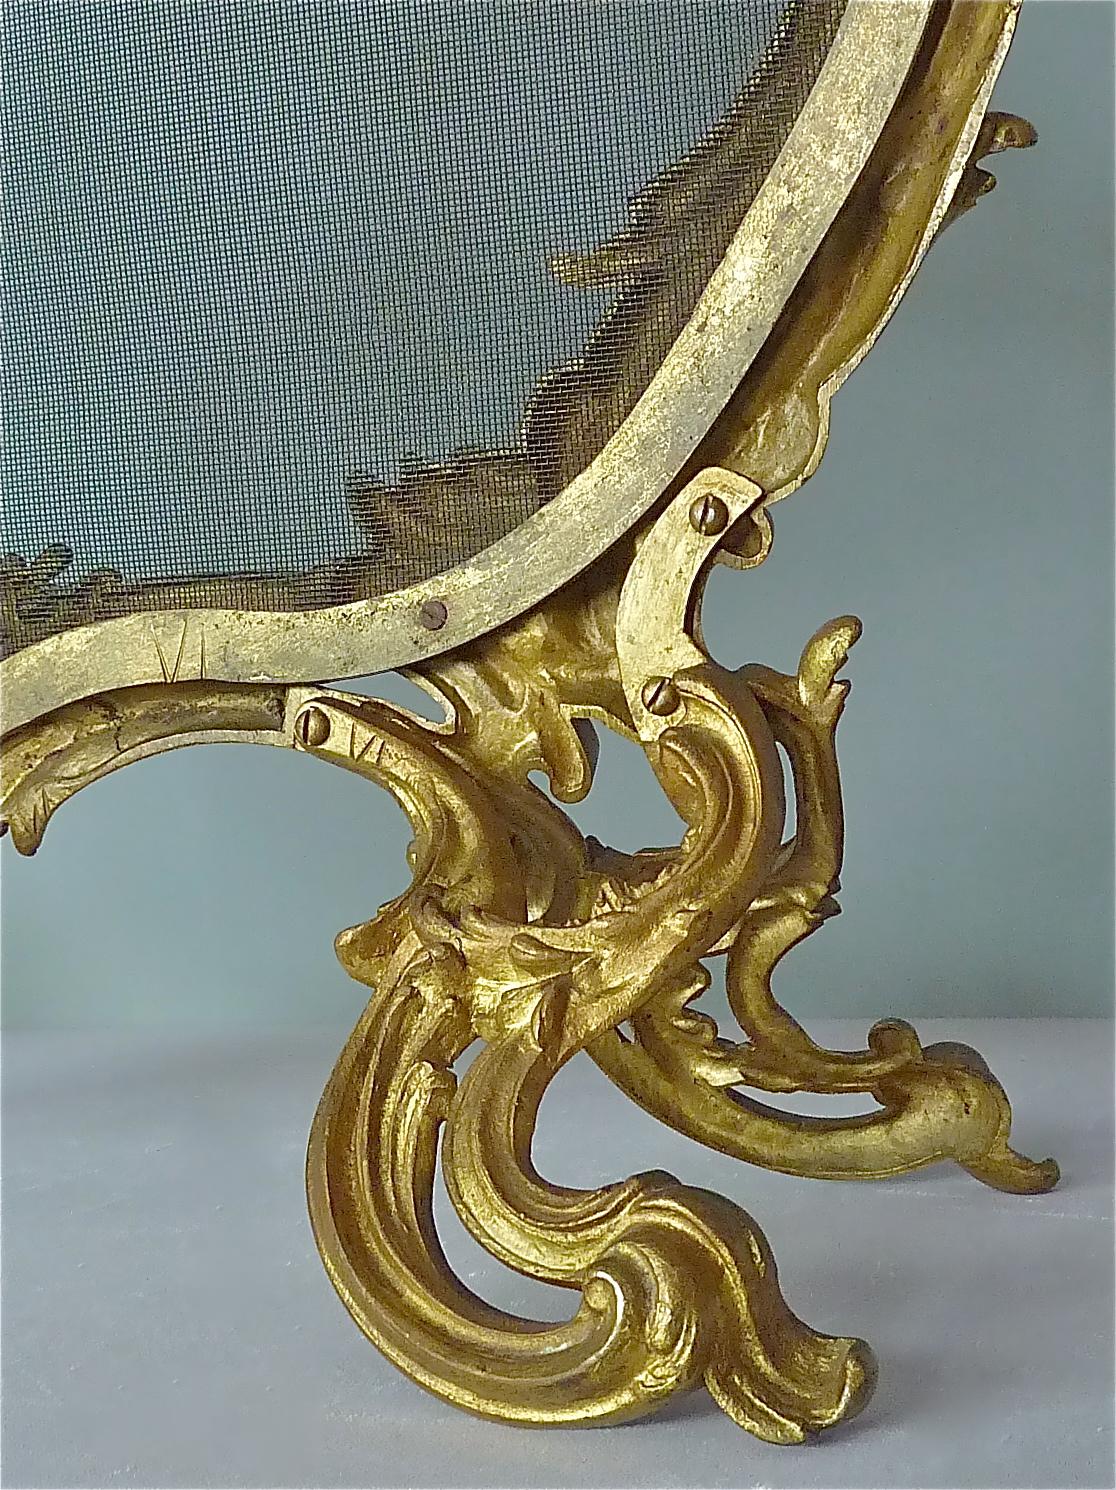 Antique French Gilt Bronze Fire Place Screen 19th Century Cherub Louis XV Style For Sale 16